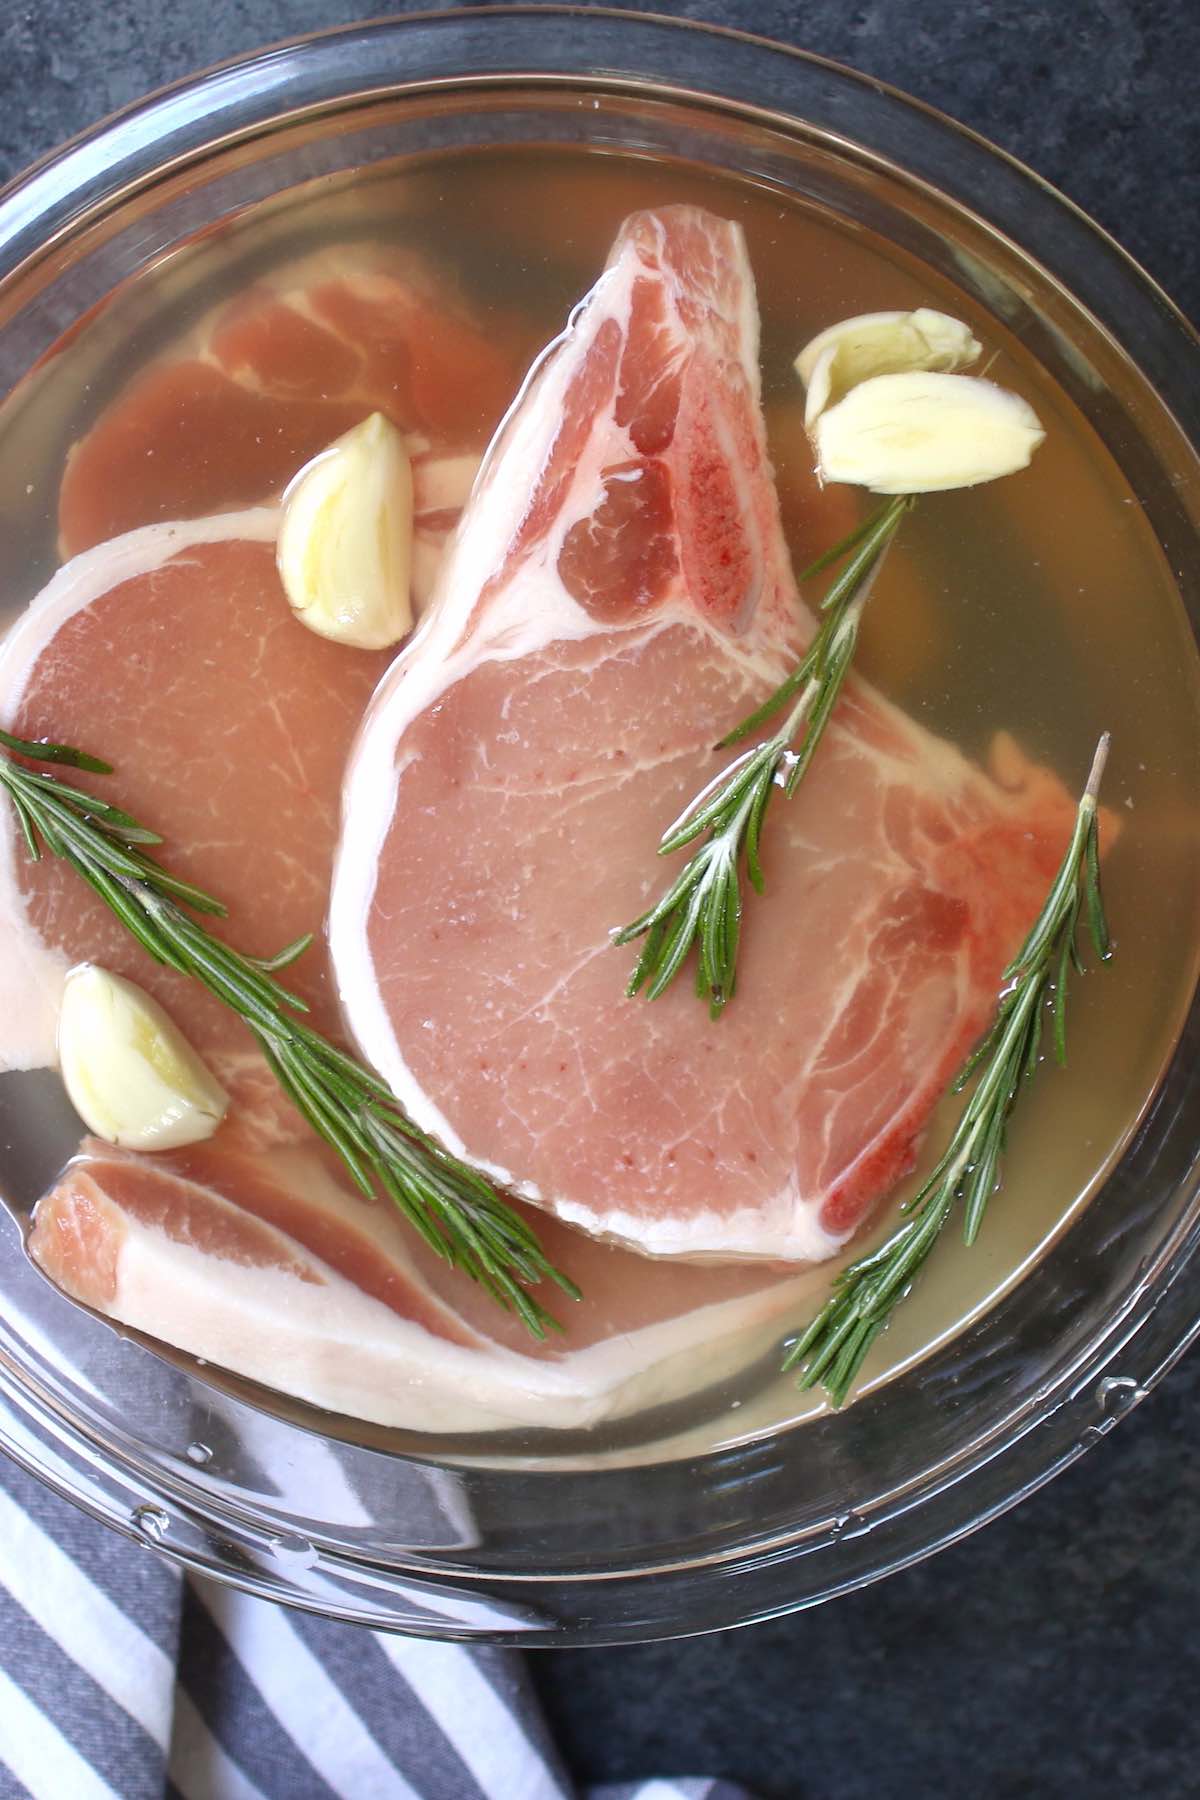 This easy pork chop brine recipe is made with salt, water, brown sugar, apple cider vinegar, rosemary, and garlic. It guarantees tender and juicy meat every time! Brined pork chops are perfect for grilling, pan-frying, or baking. #PorkChopBrine